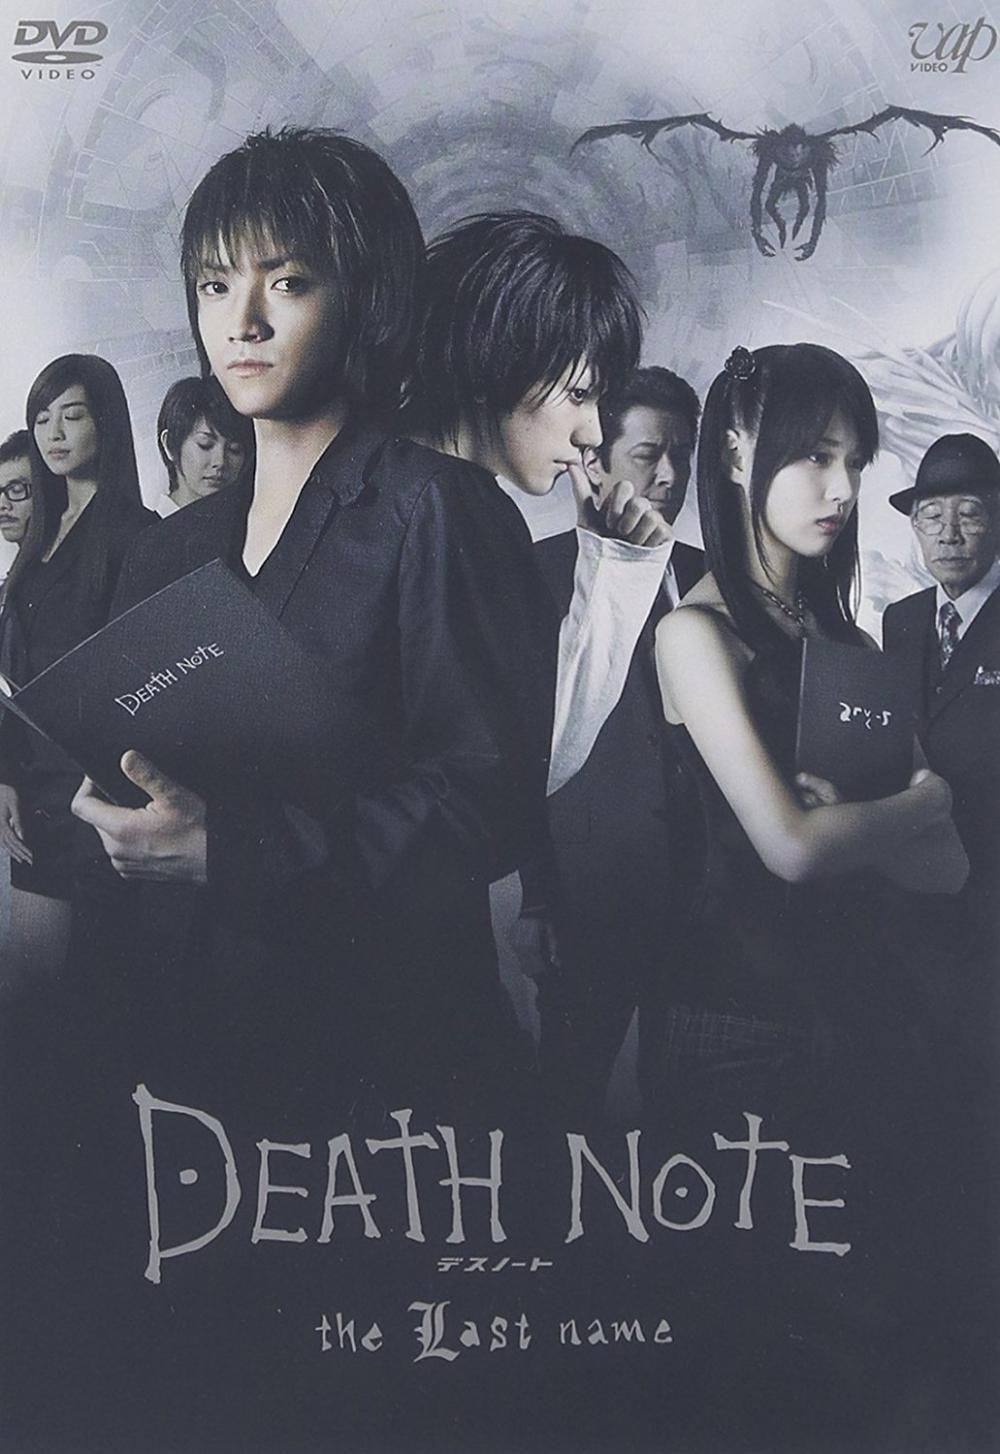 『DEATH NOTE デスノート the Last name 』